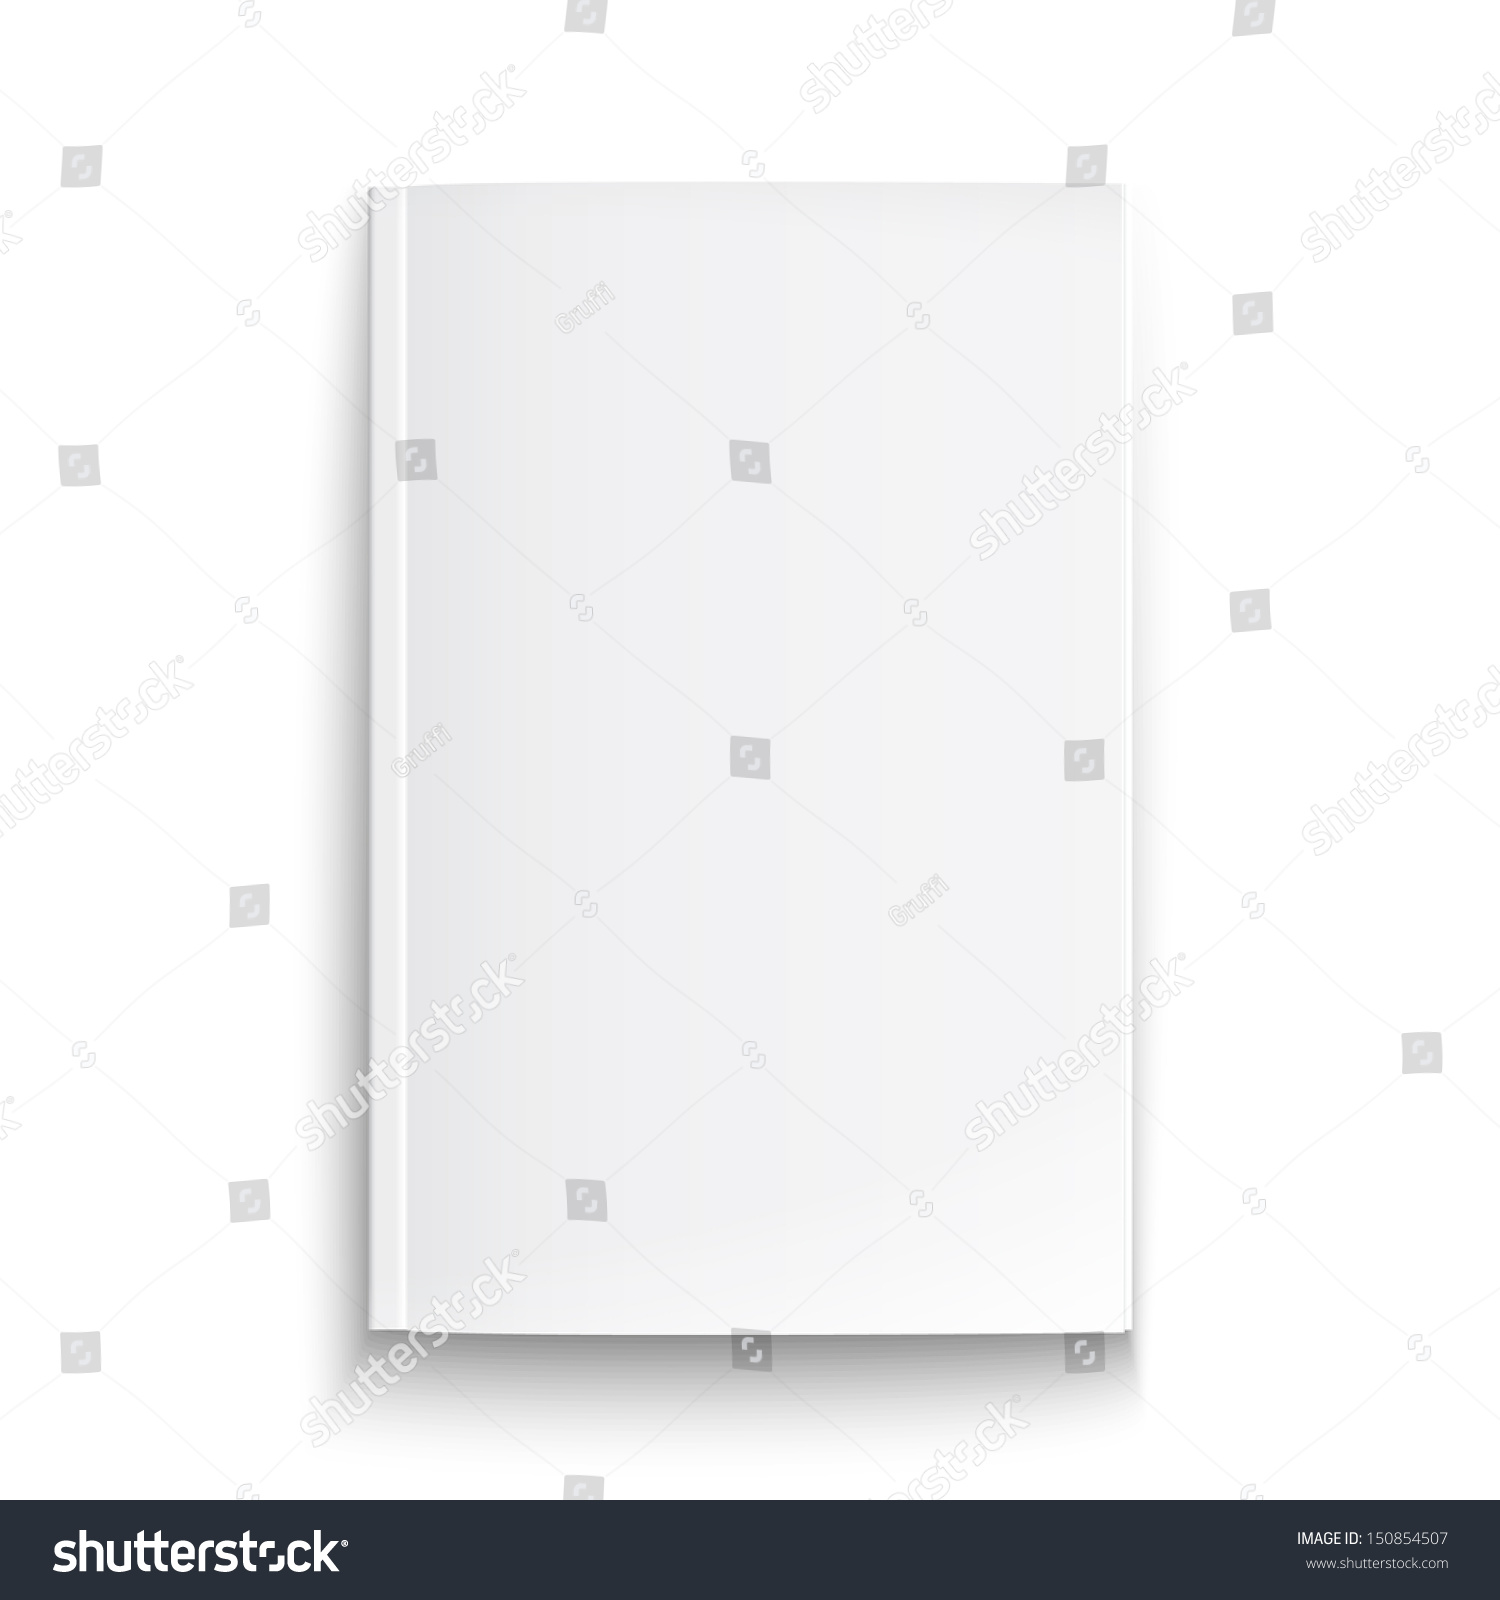 Blank magazine template on white background with soft shadows. Vector illustration. EPS10. #150854507